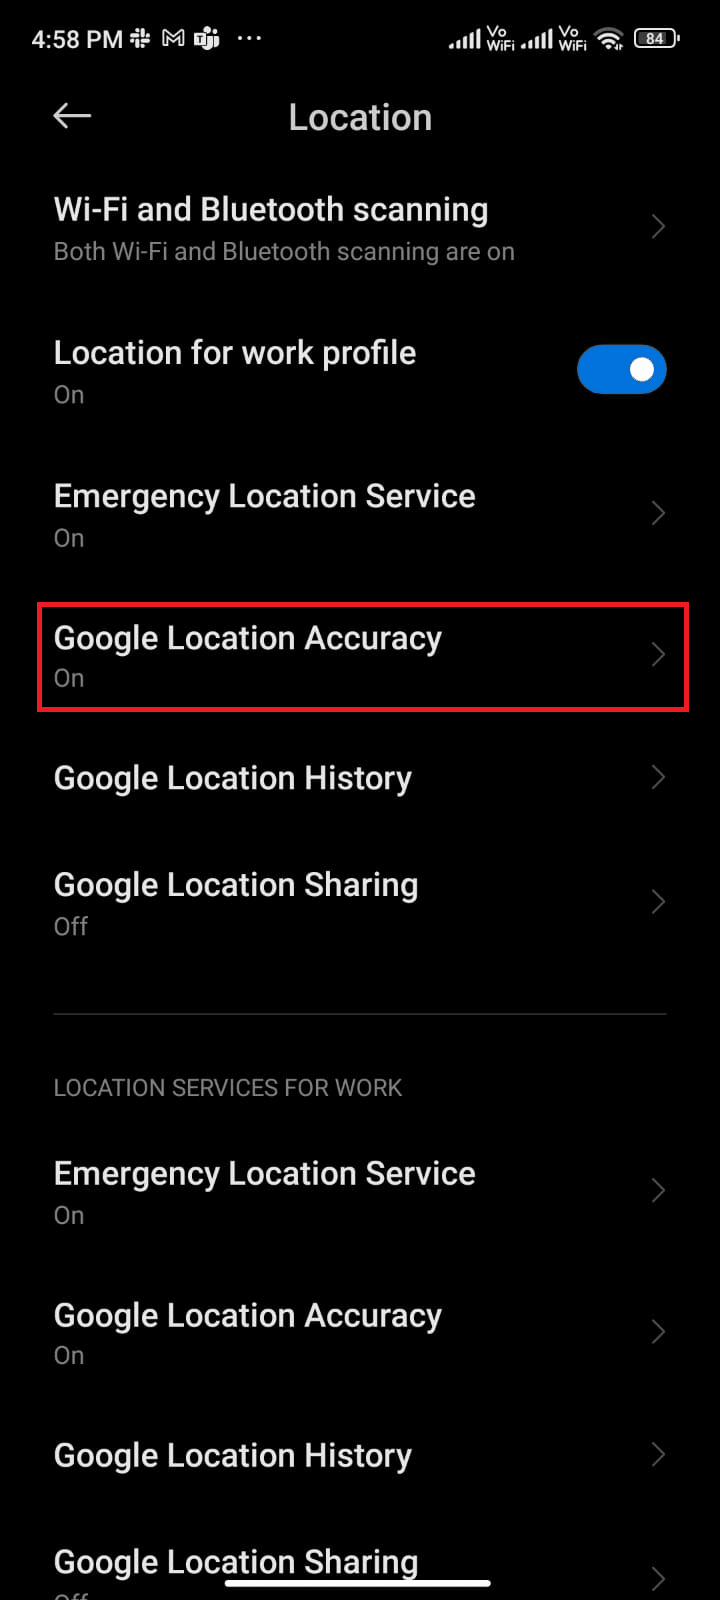 tap the Google Location Accuracy option